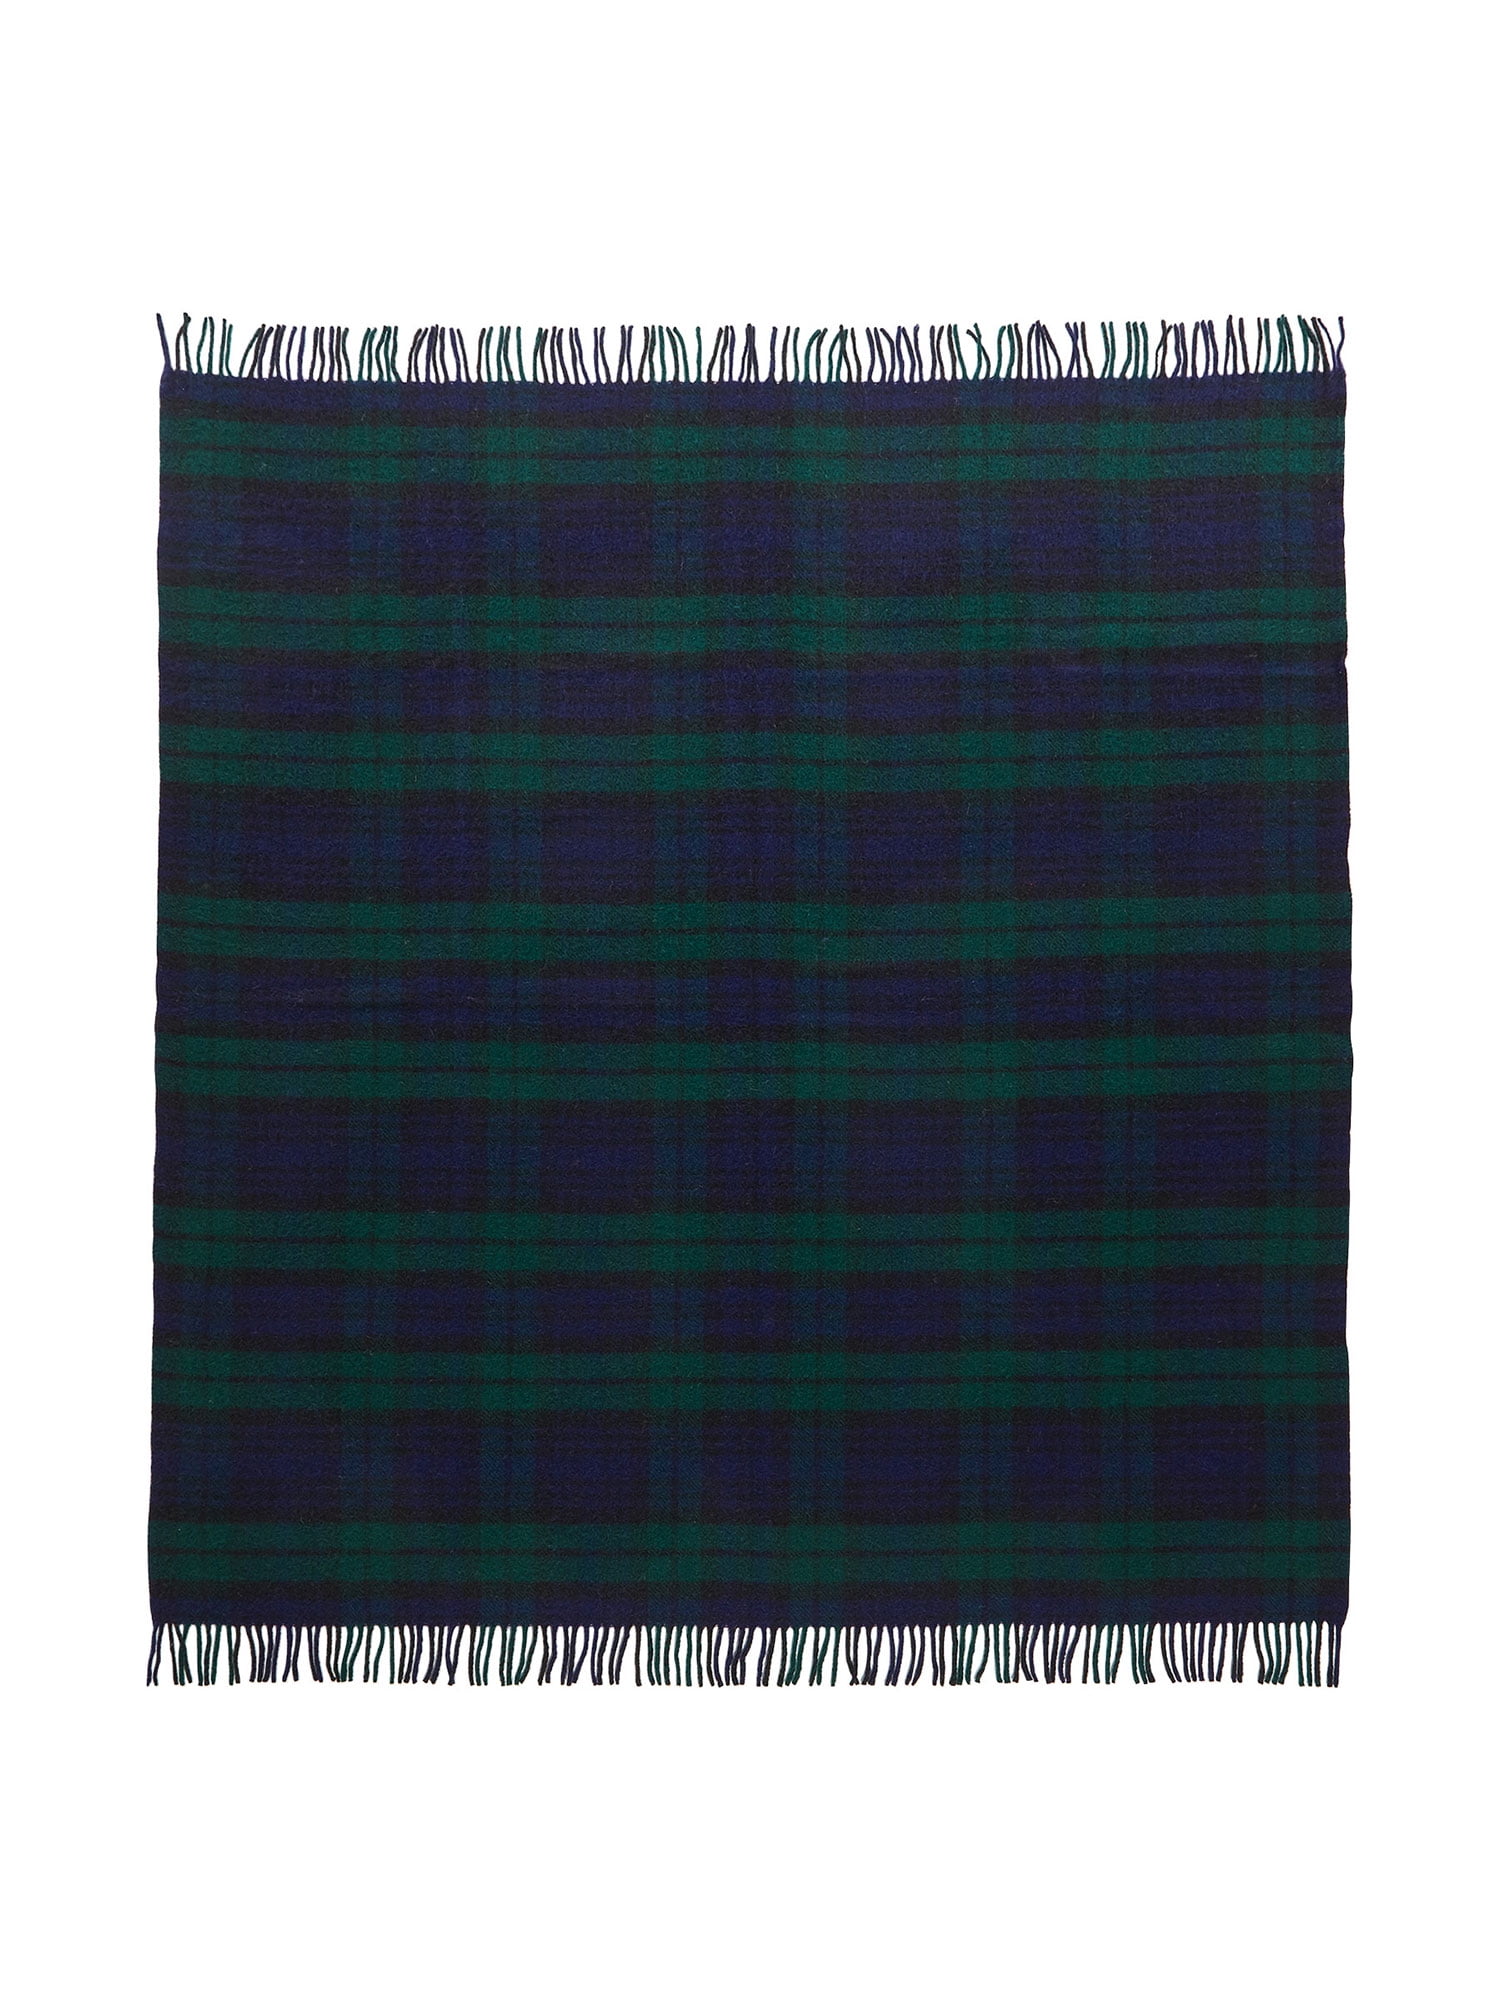 Stylish Royal Stuart Tartan Plaid Blanket Ultra Soft Micro Fleece Blanket Throw Super Soft Fuzzy Lightweight Blanket for Bed Couch Living Room 60x50Inch